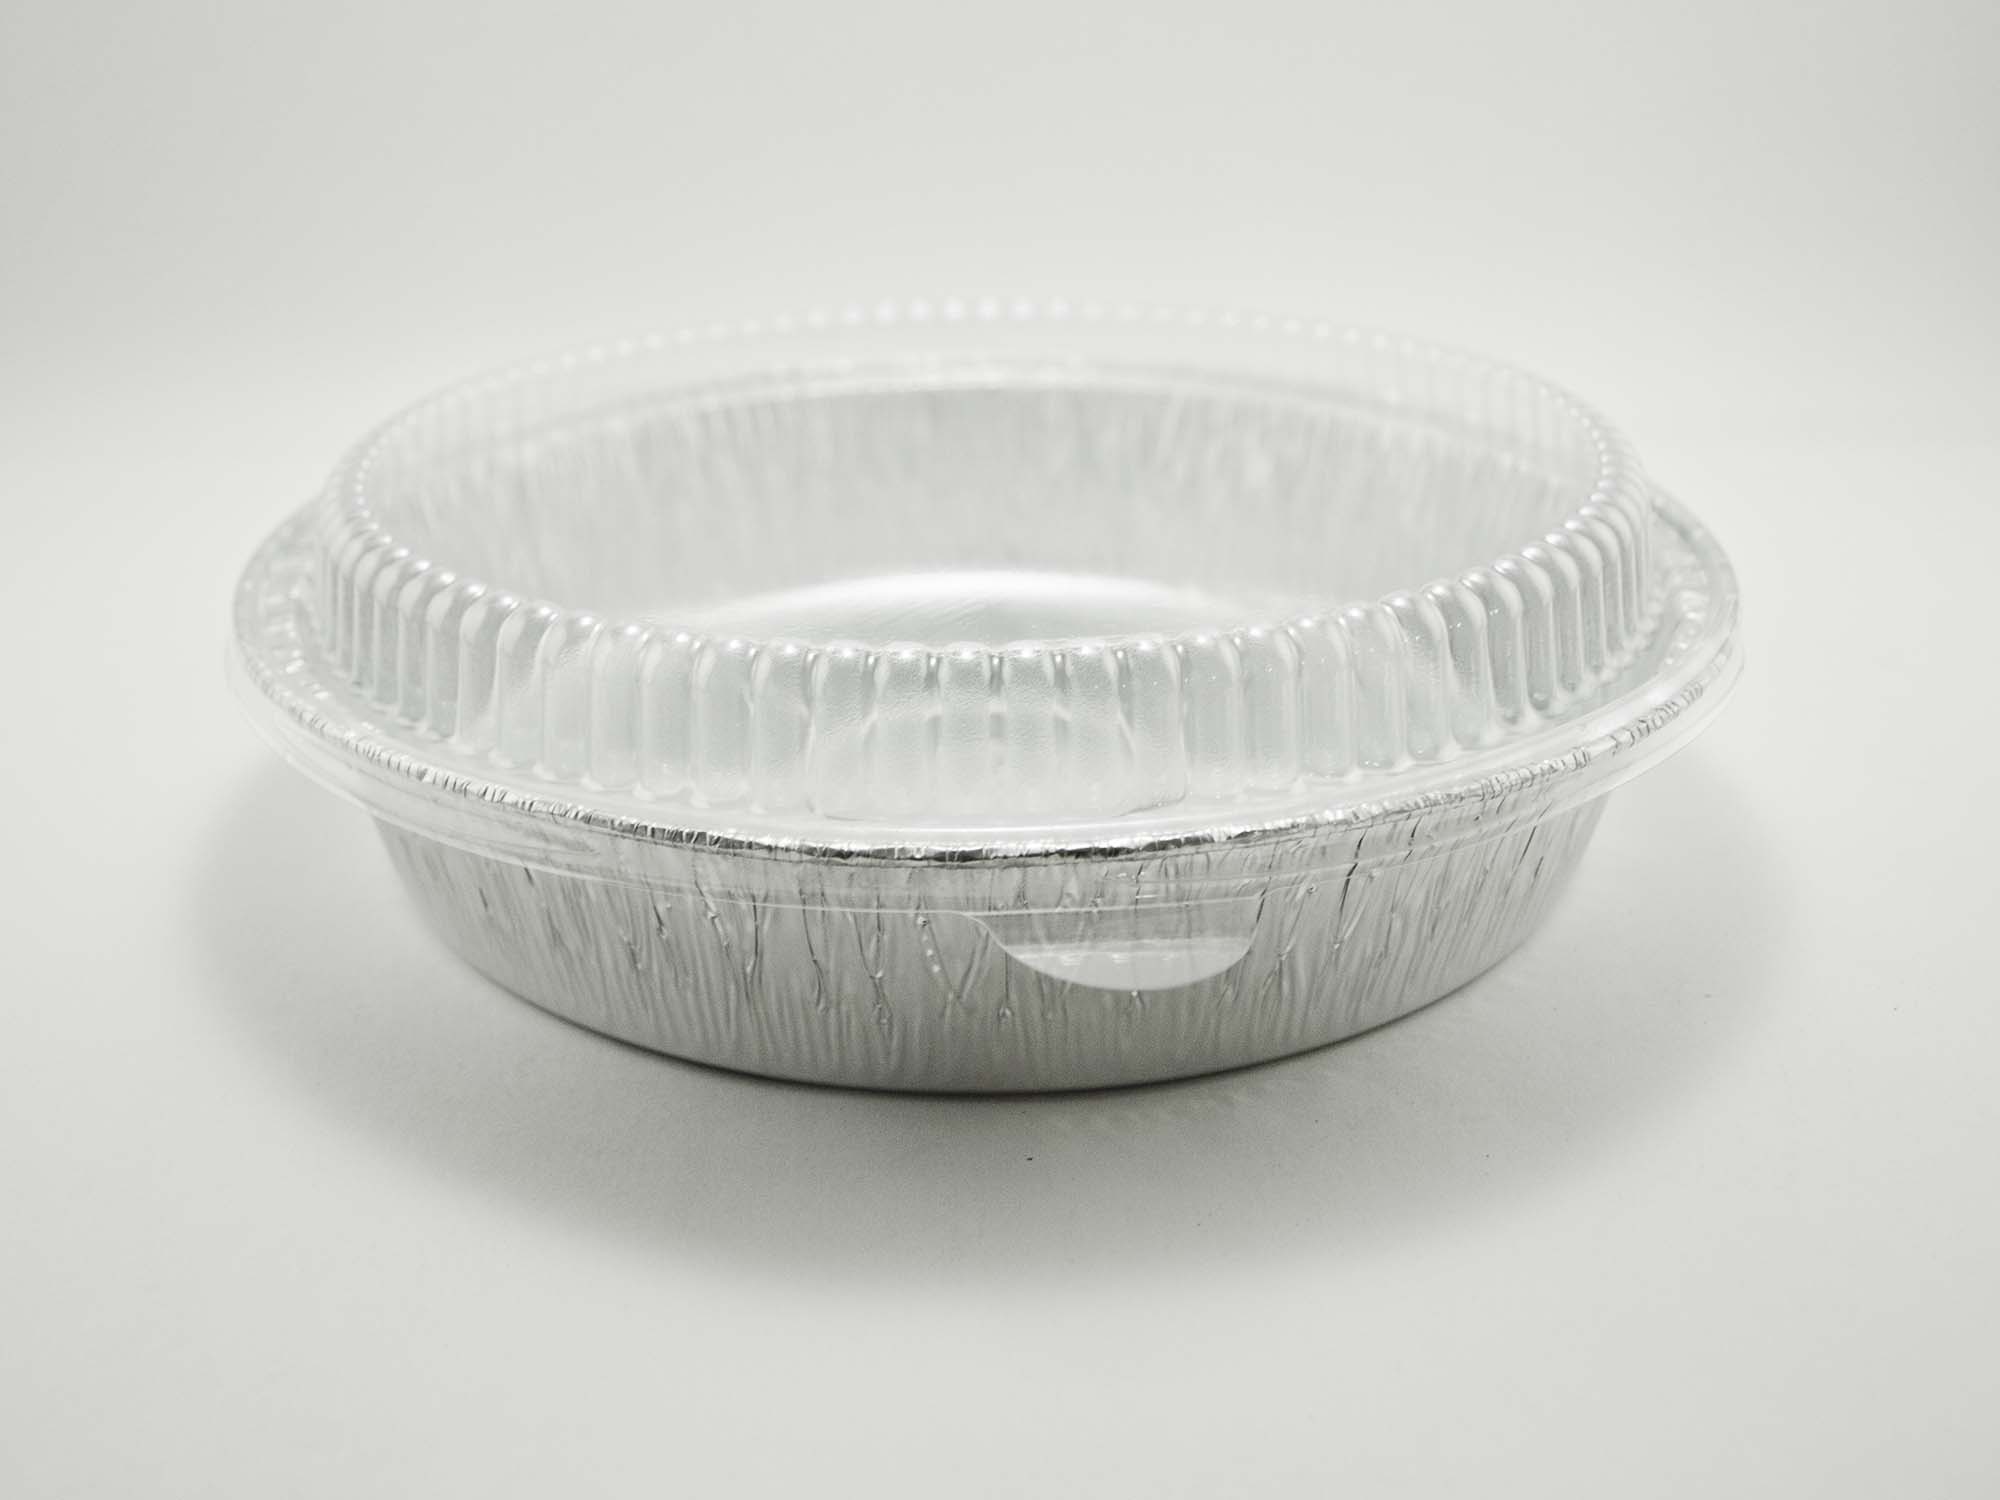 Durable Packaging 8 Round Aluminum Foil Take-Out/Cake Pan w/Clear Dome Lid Disposable pack of 50 